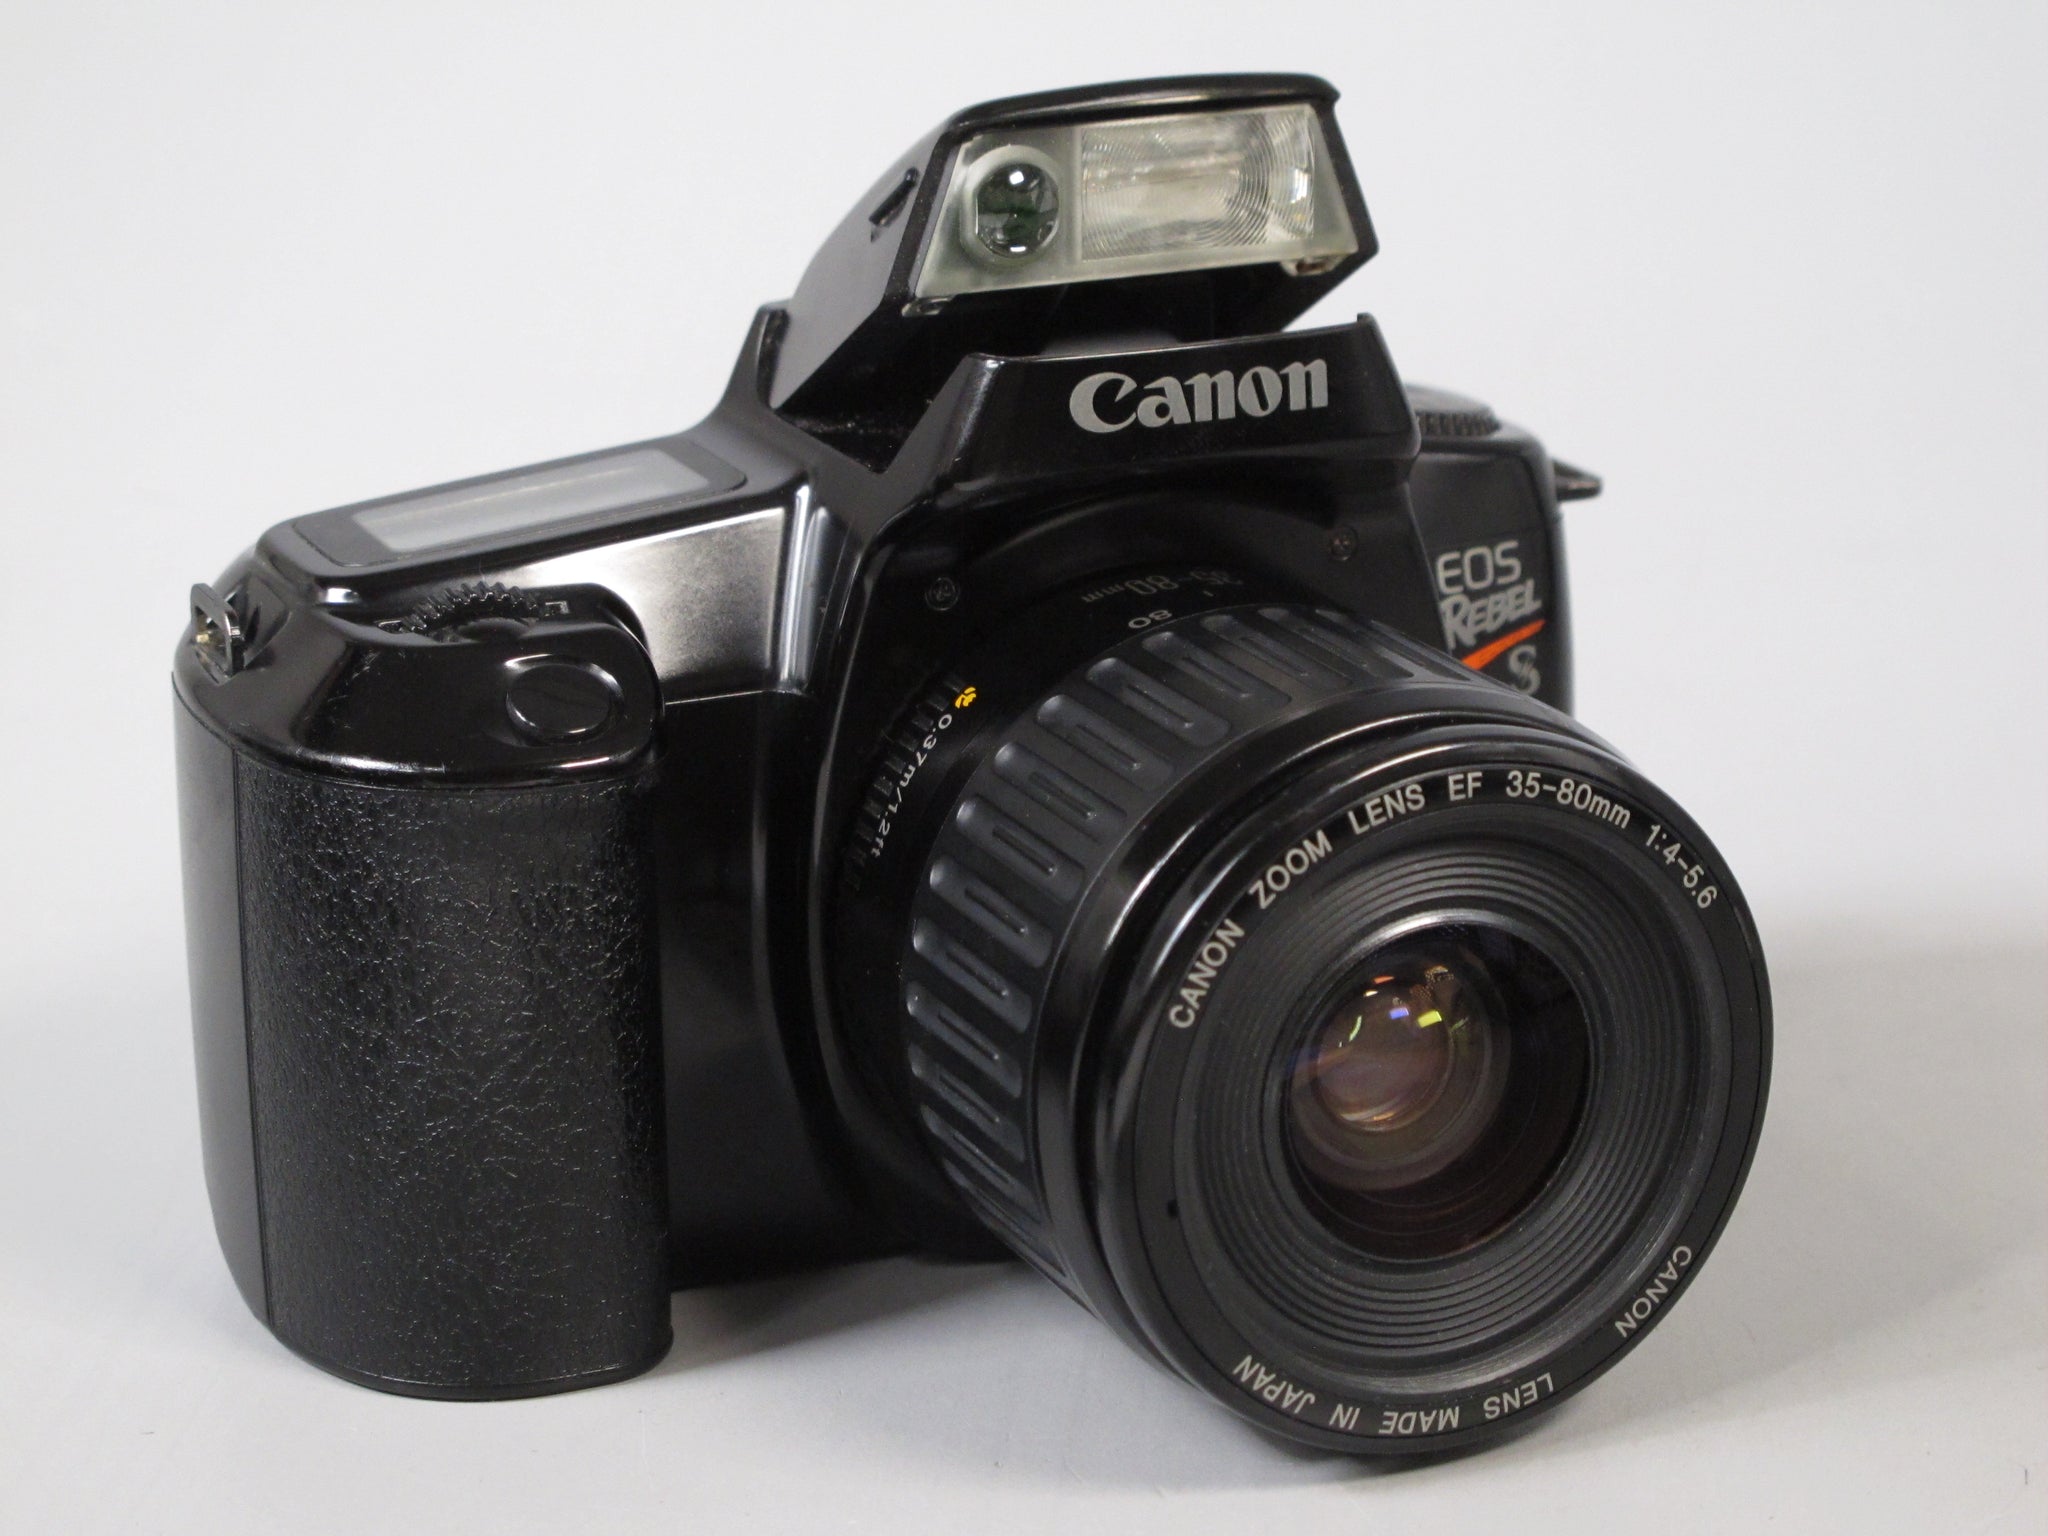 Canon EOS REBEL S 35mm Camera with 35-80mm f4-5.6 Canon EF